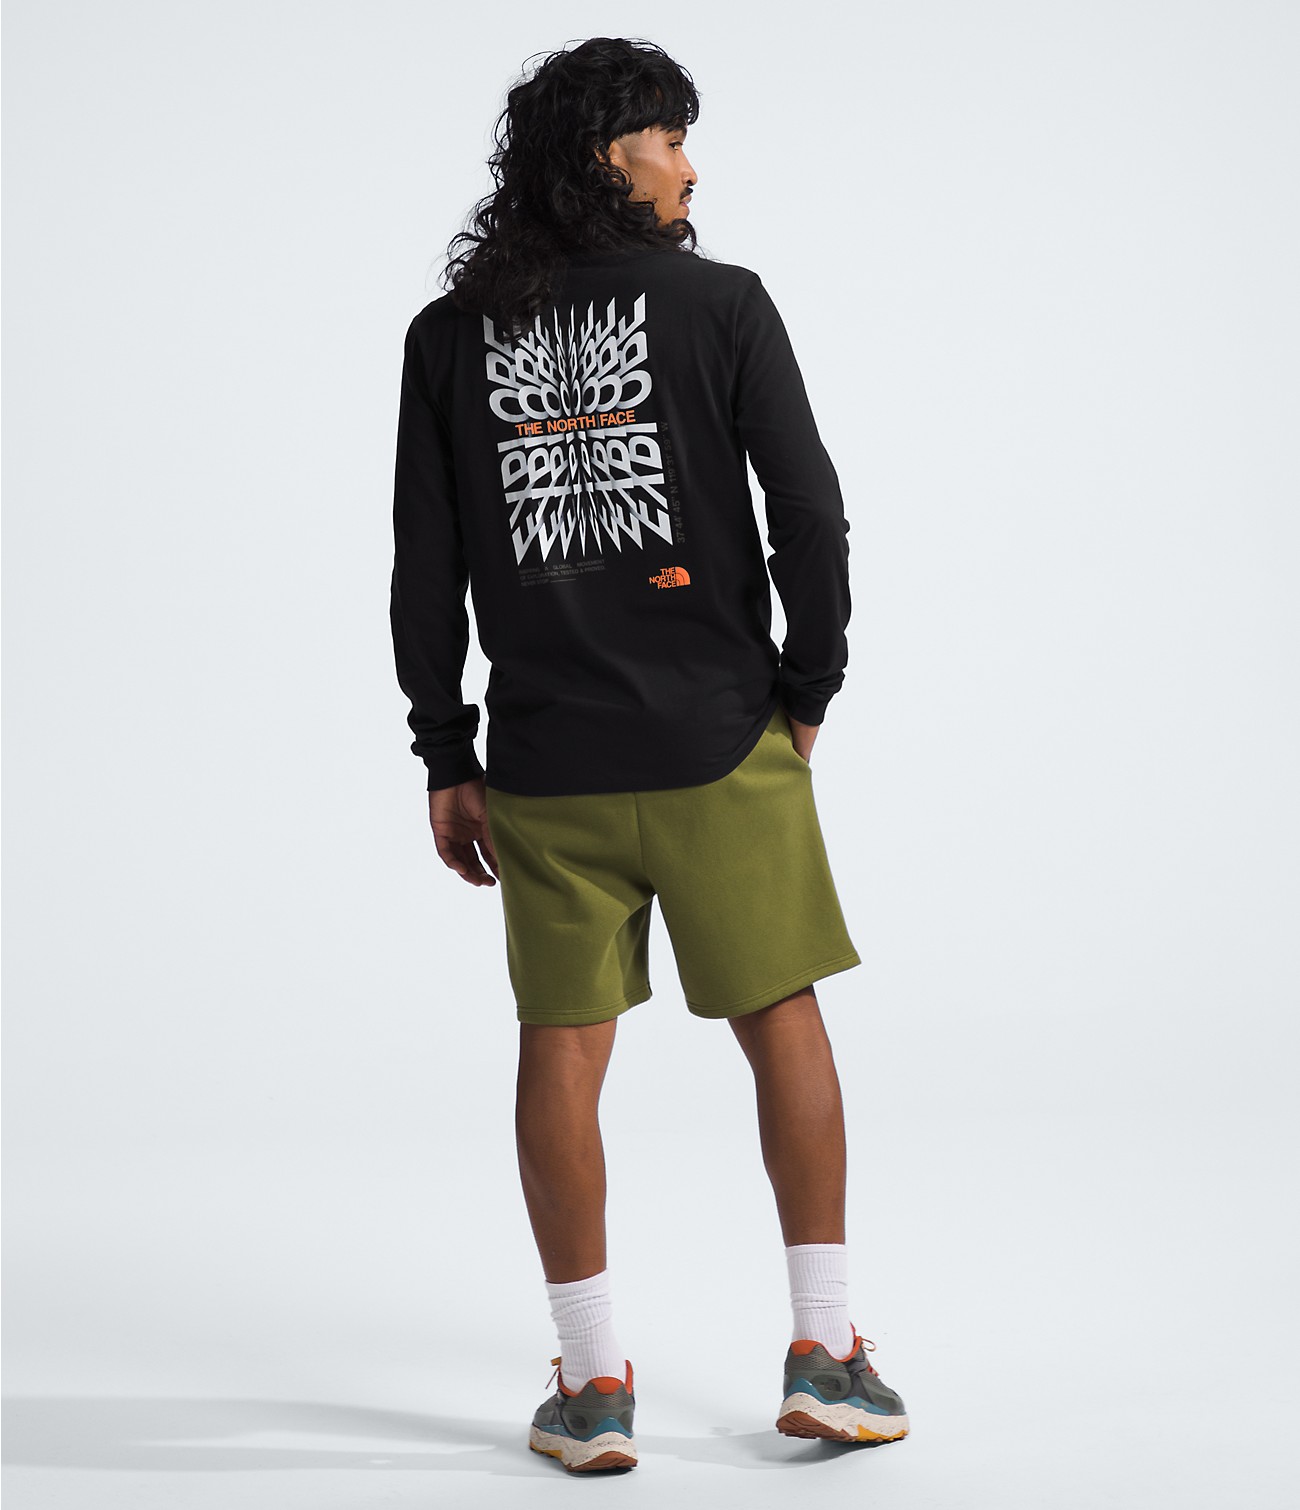 Men’s Long-Sleeve Brand Proud Tee | The North Face